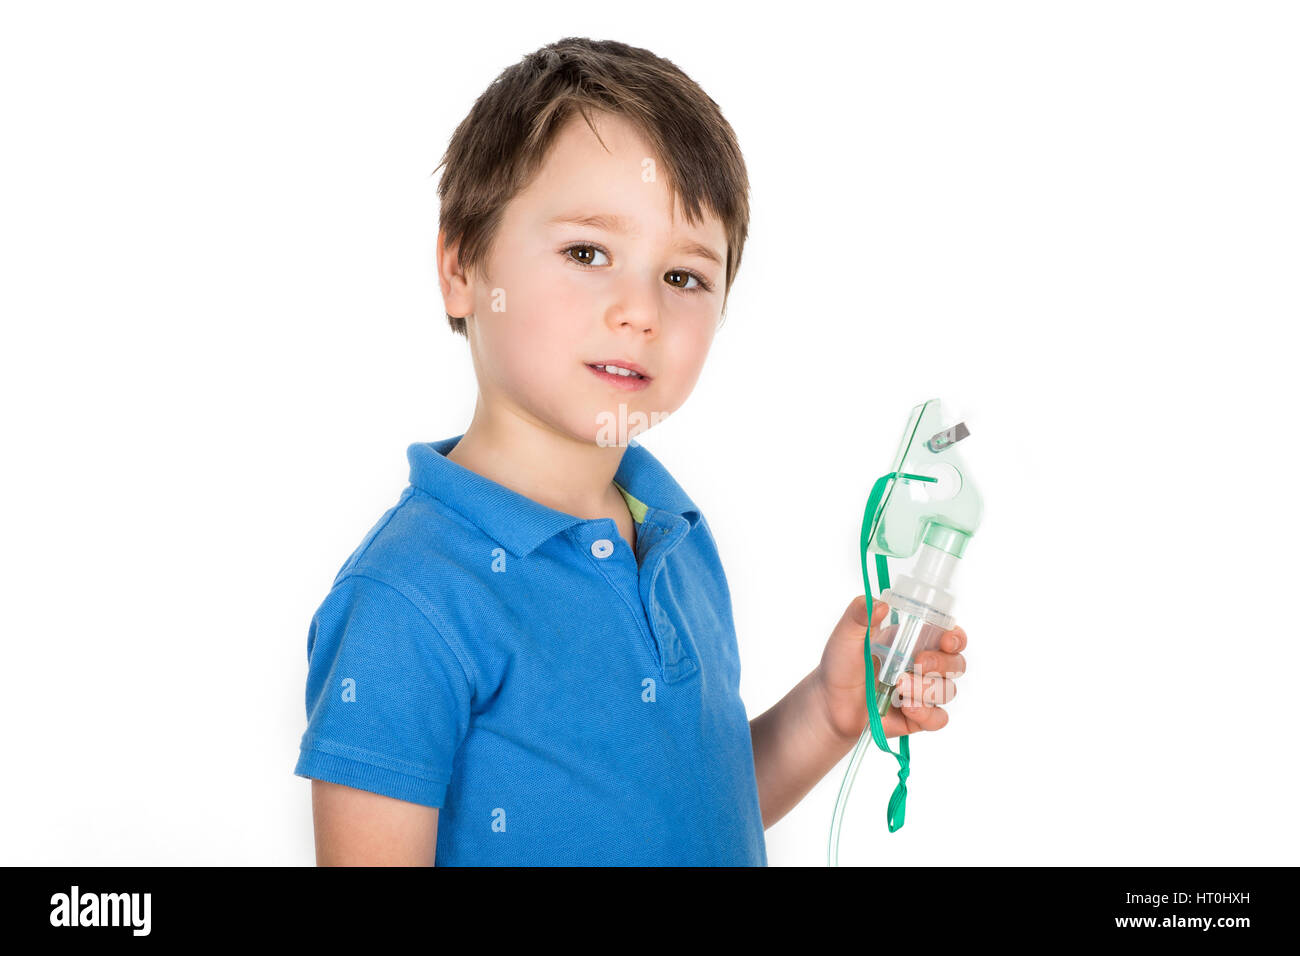 5 years old boy with asthma holding facemask from nebulizer inhaler machine. Isolated on a white background. Stock Photo